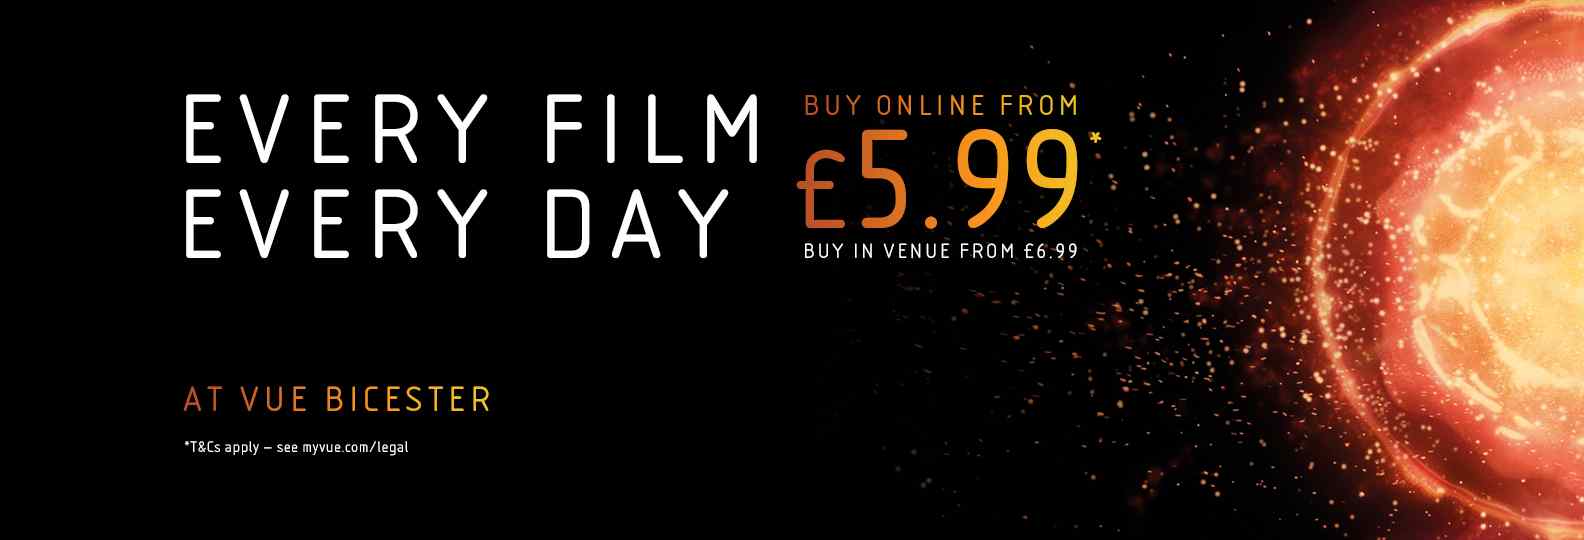 Vue Bicester | Every Film, Every Day from £5.99